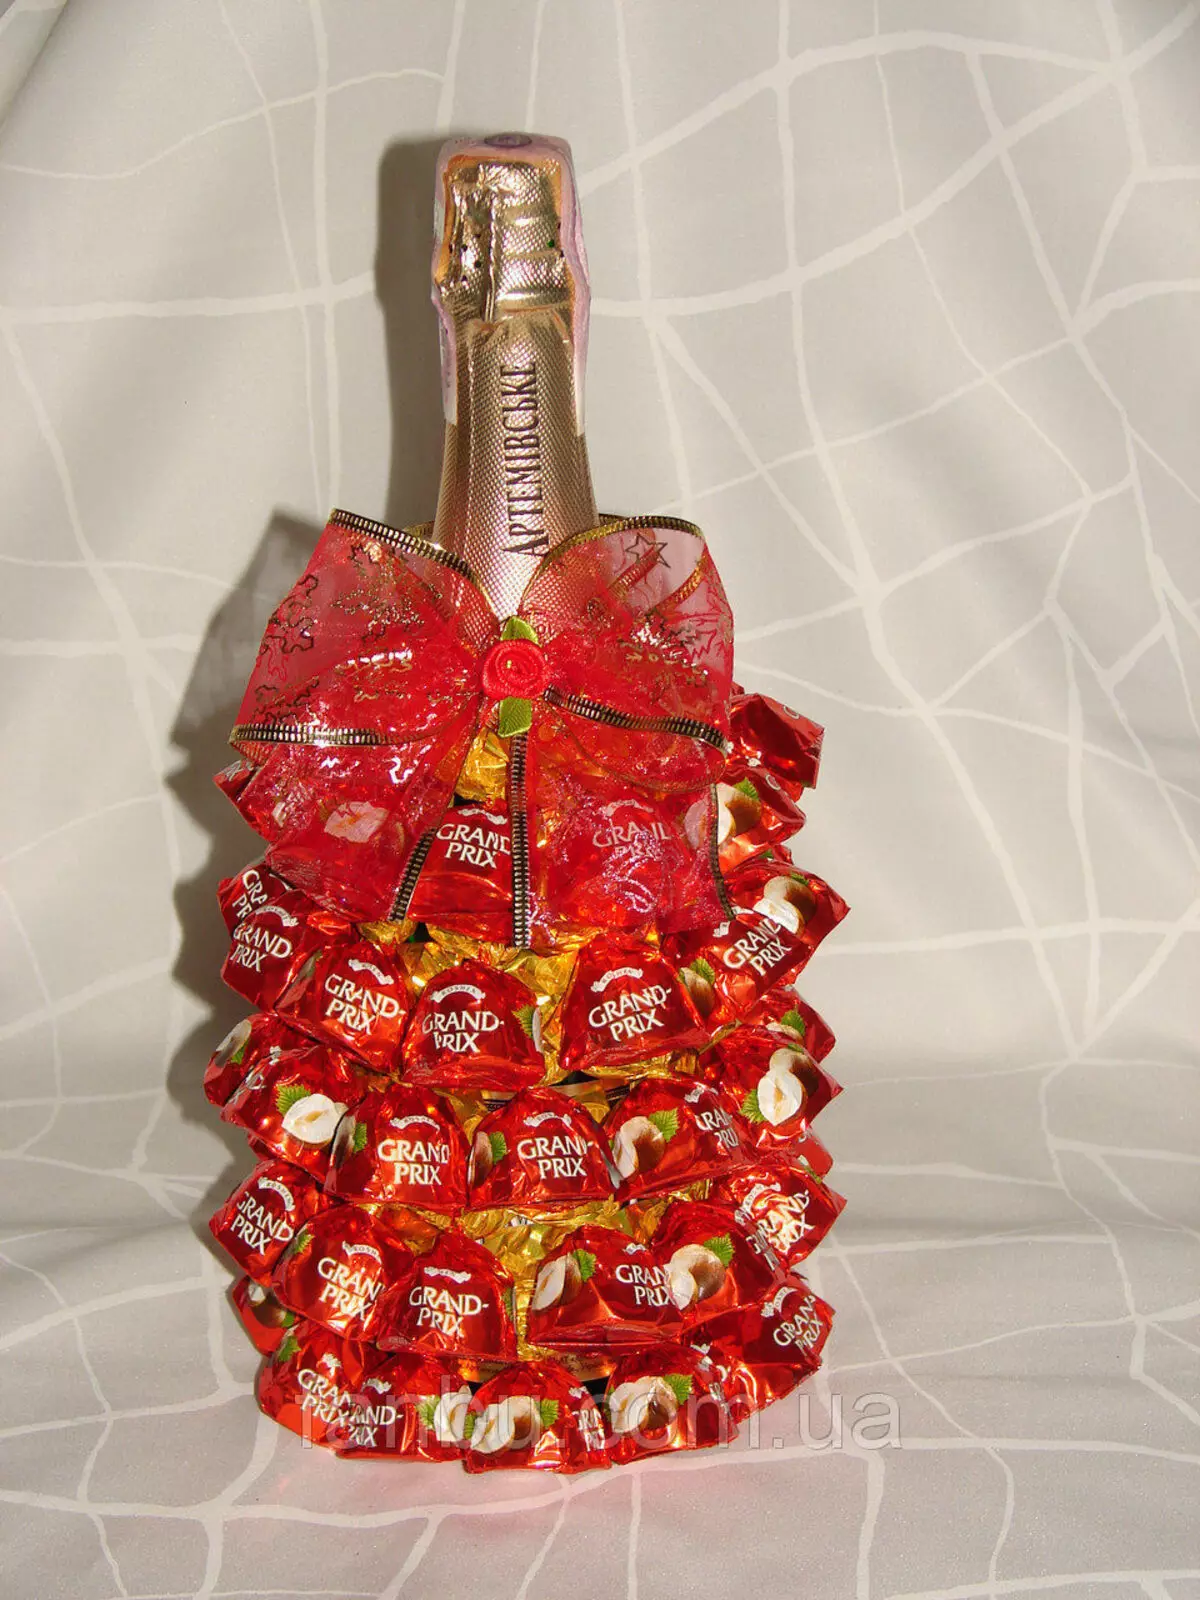 Champagne decorated with candy for the new year: Bottle decoration with their own hands in the form of pineapple, male design and decor for women 7613_10